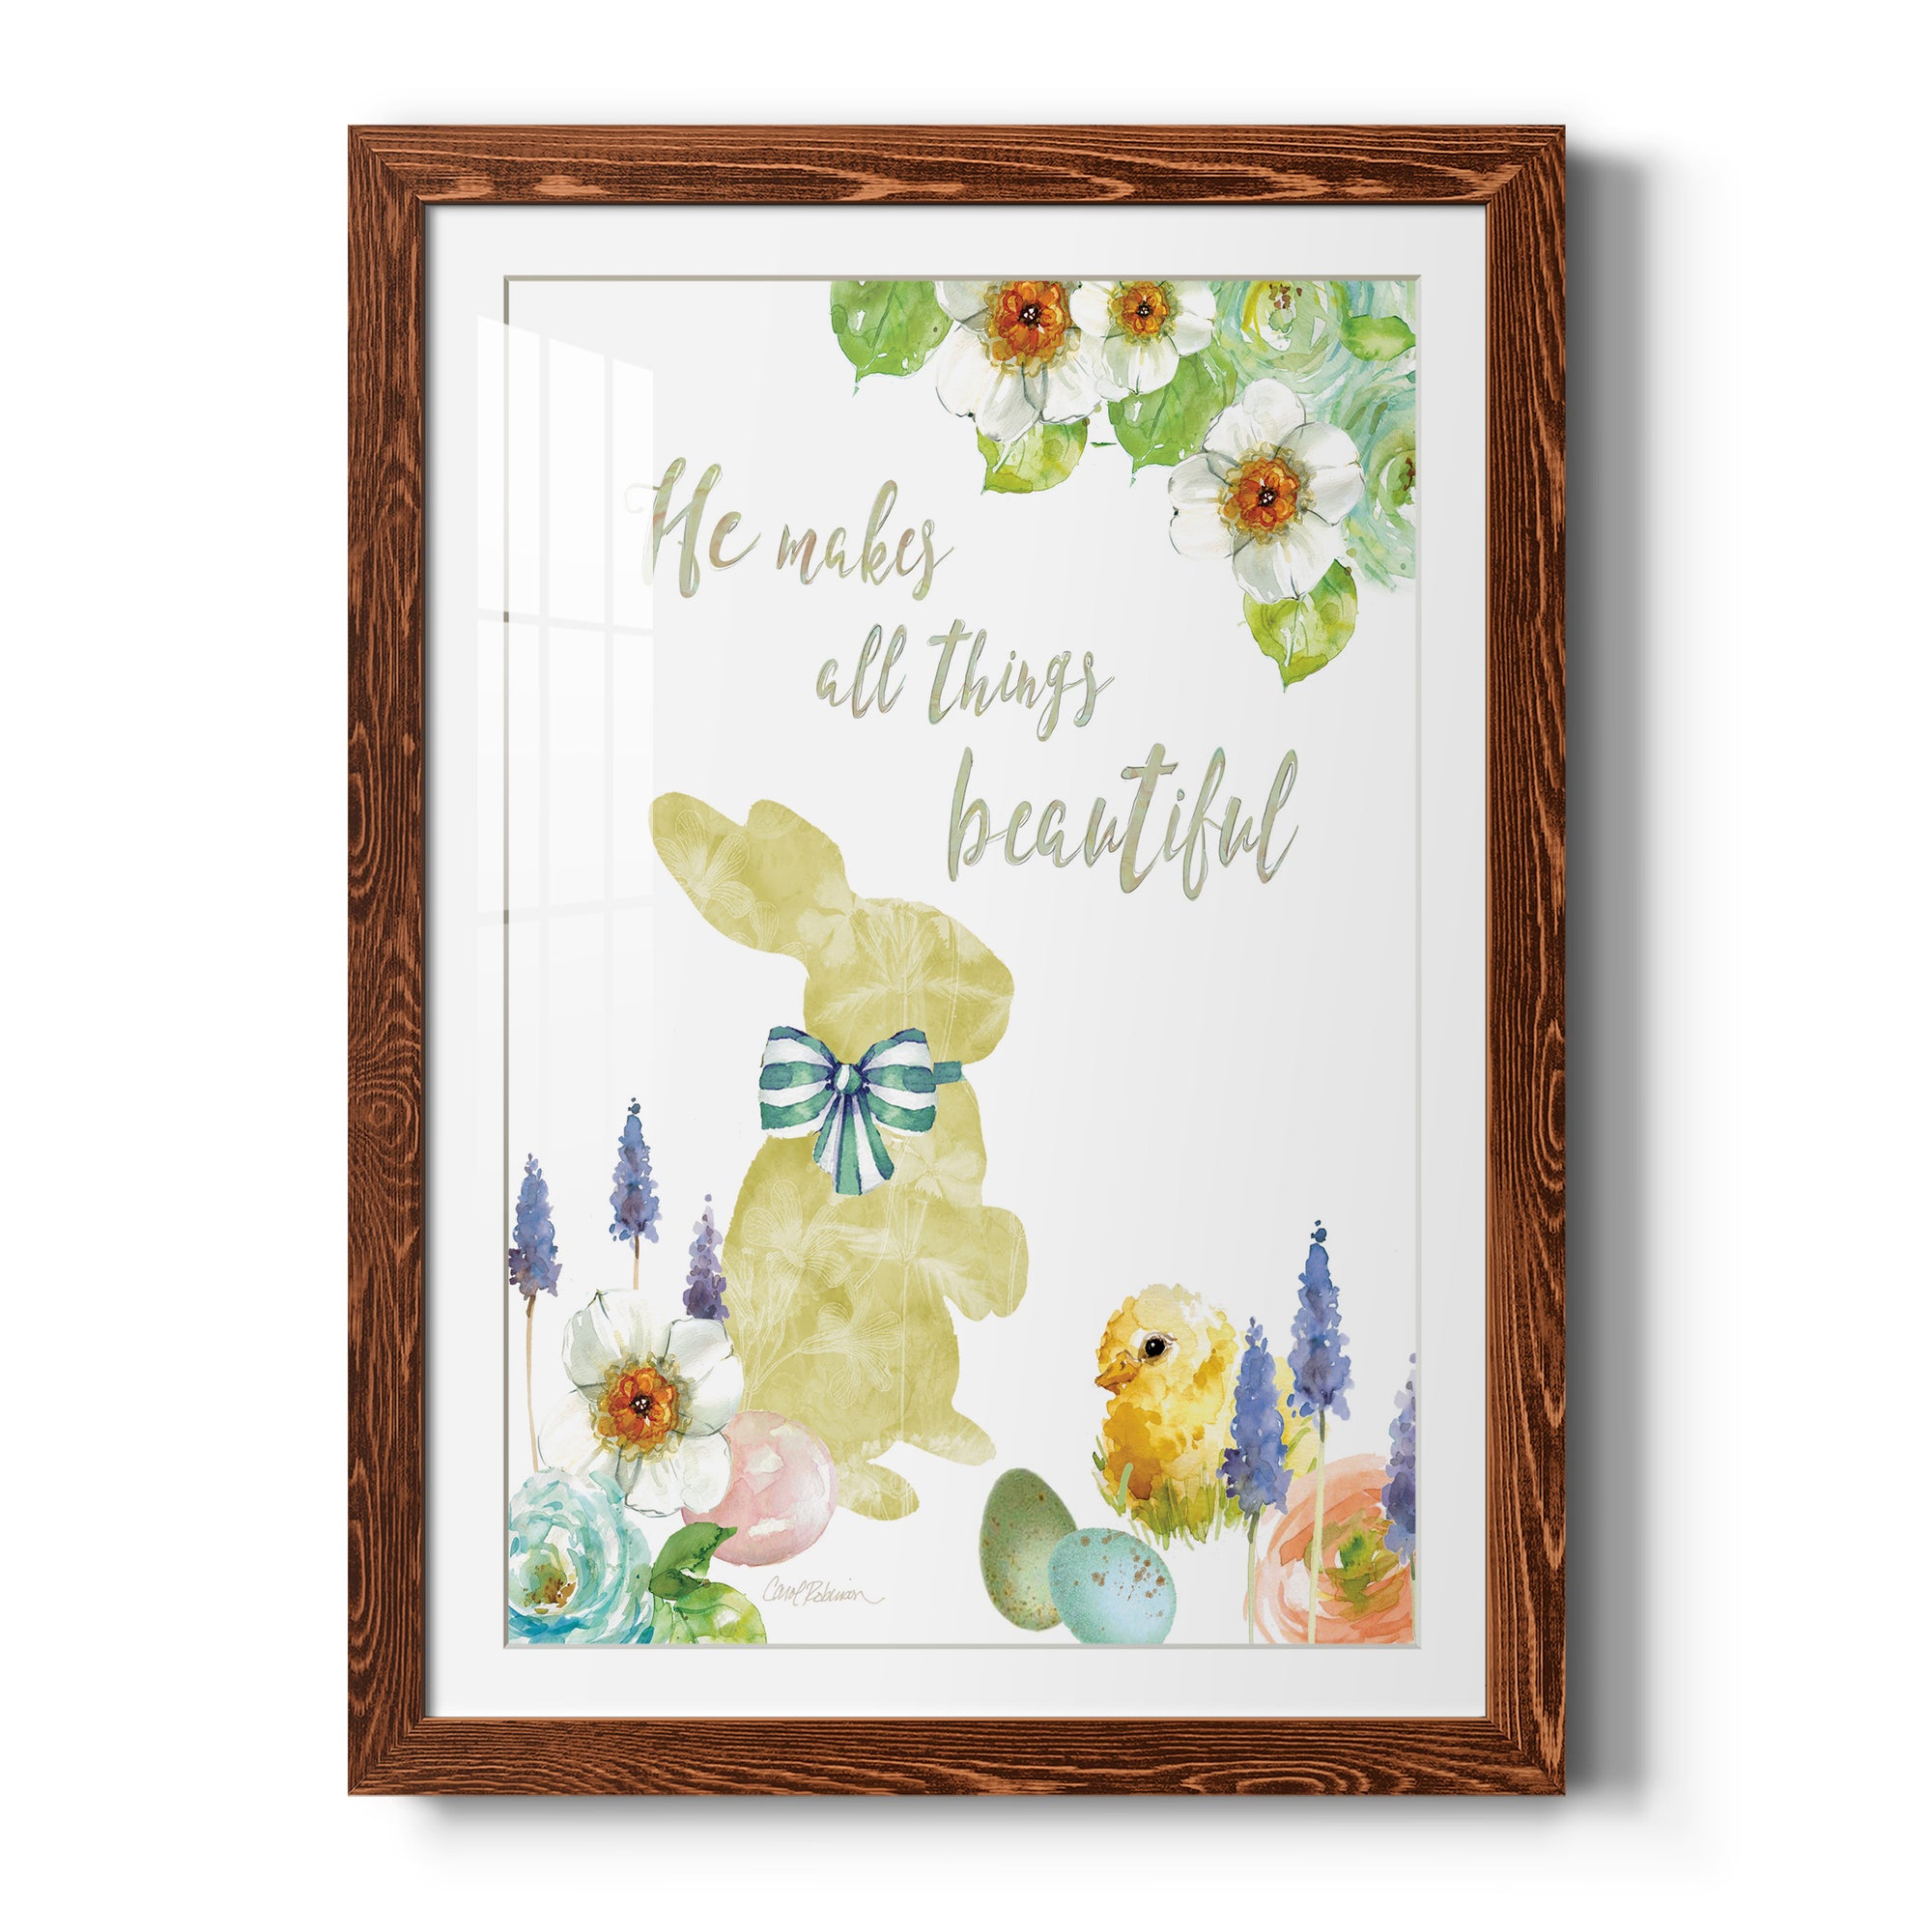 All Things Bunny - Premium Framed Print - Distressed Barnwood Frame - Ready to Hang